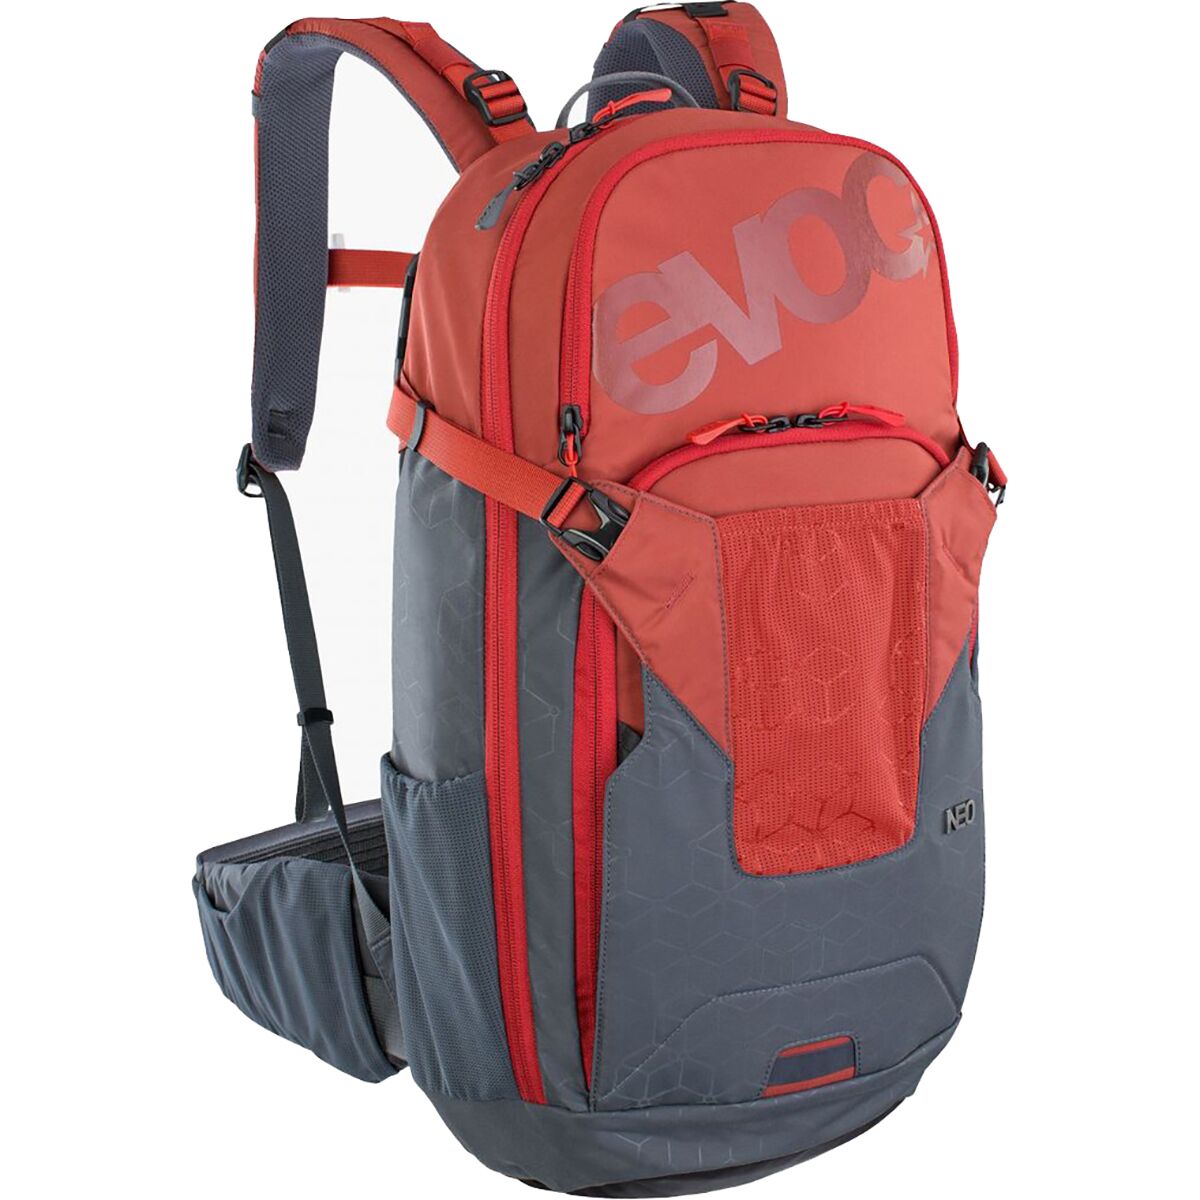 Evoc Neo 16L Protector Hydration Pack Chili Red/Carbon Grey, S/M